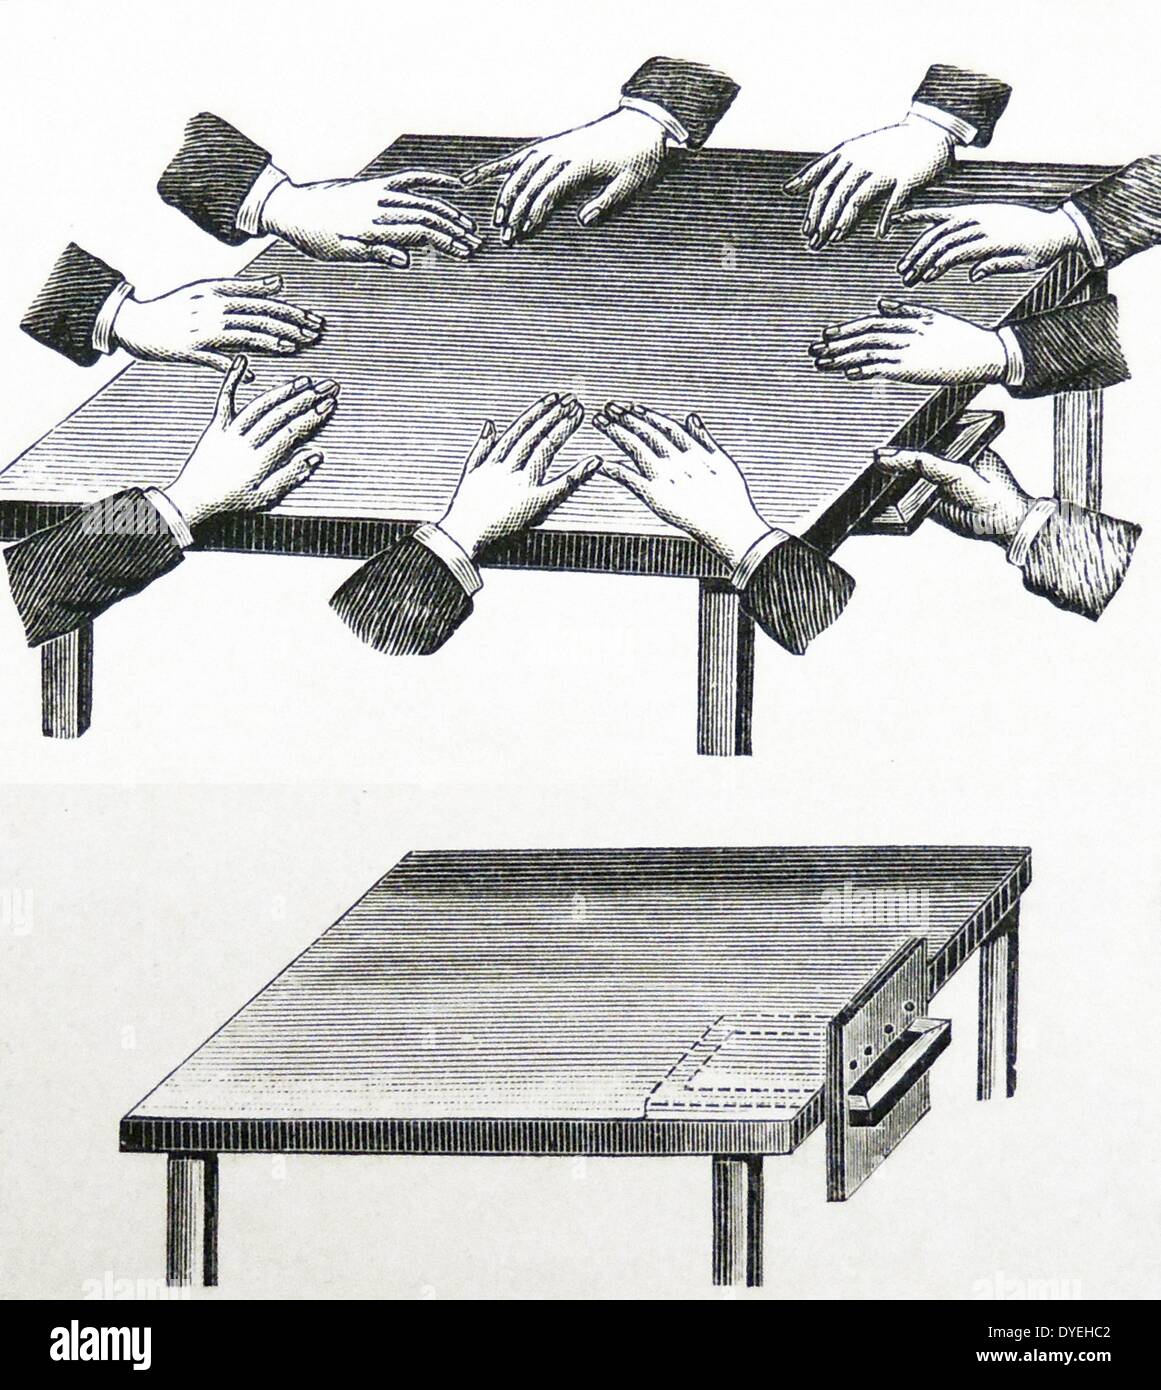 Spirit writing: arrangement of hands on table in order to produce spirit writing on a slate during a séance. At bottom shows tabled adapted for writing through the medium. Engraving, 1895. Stock Photo